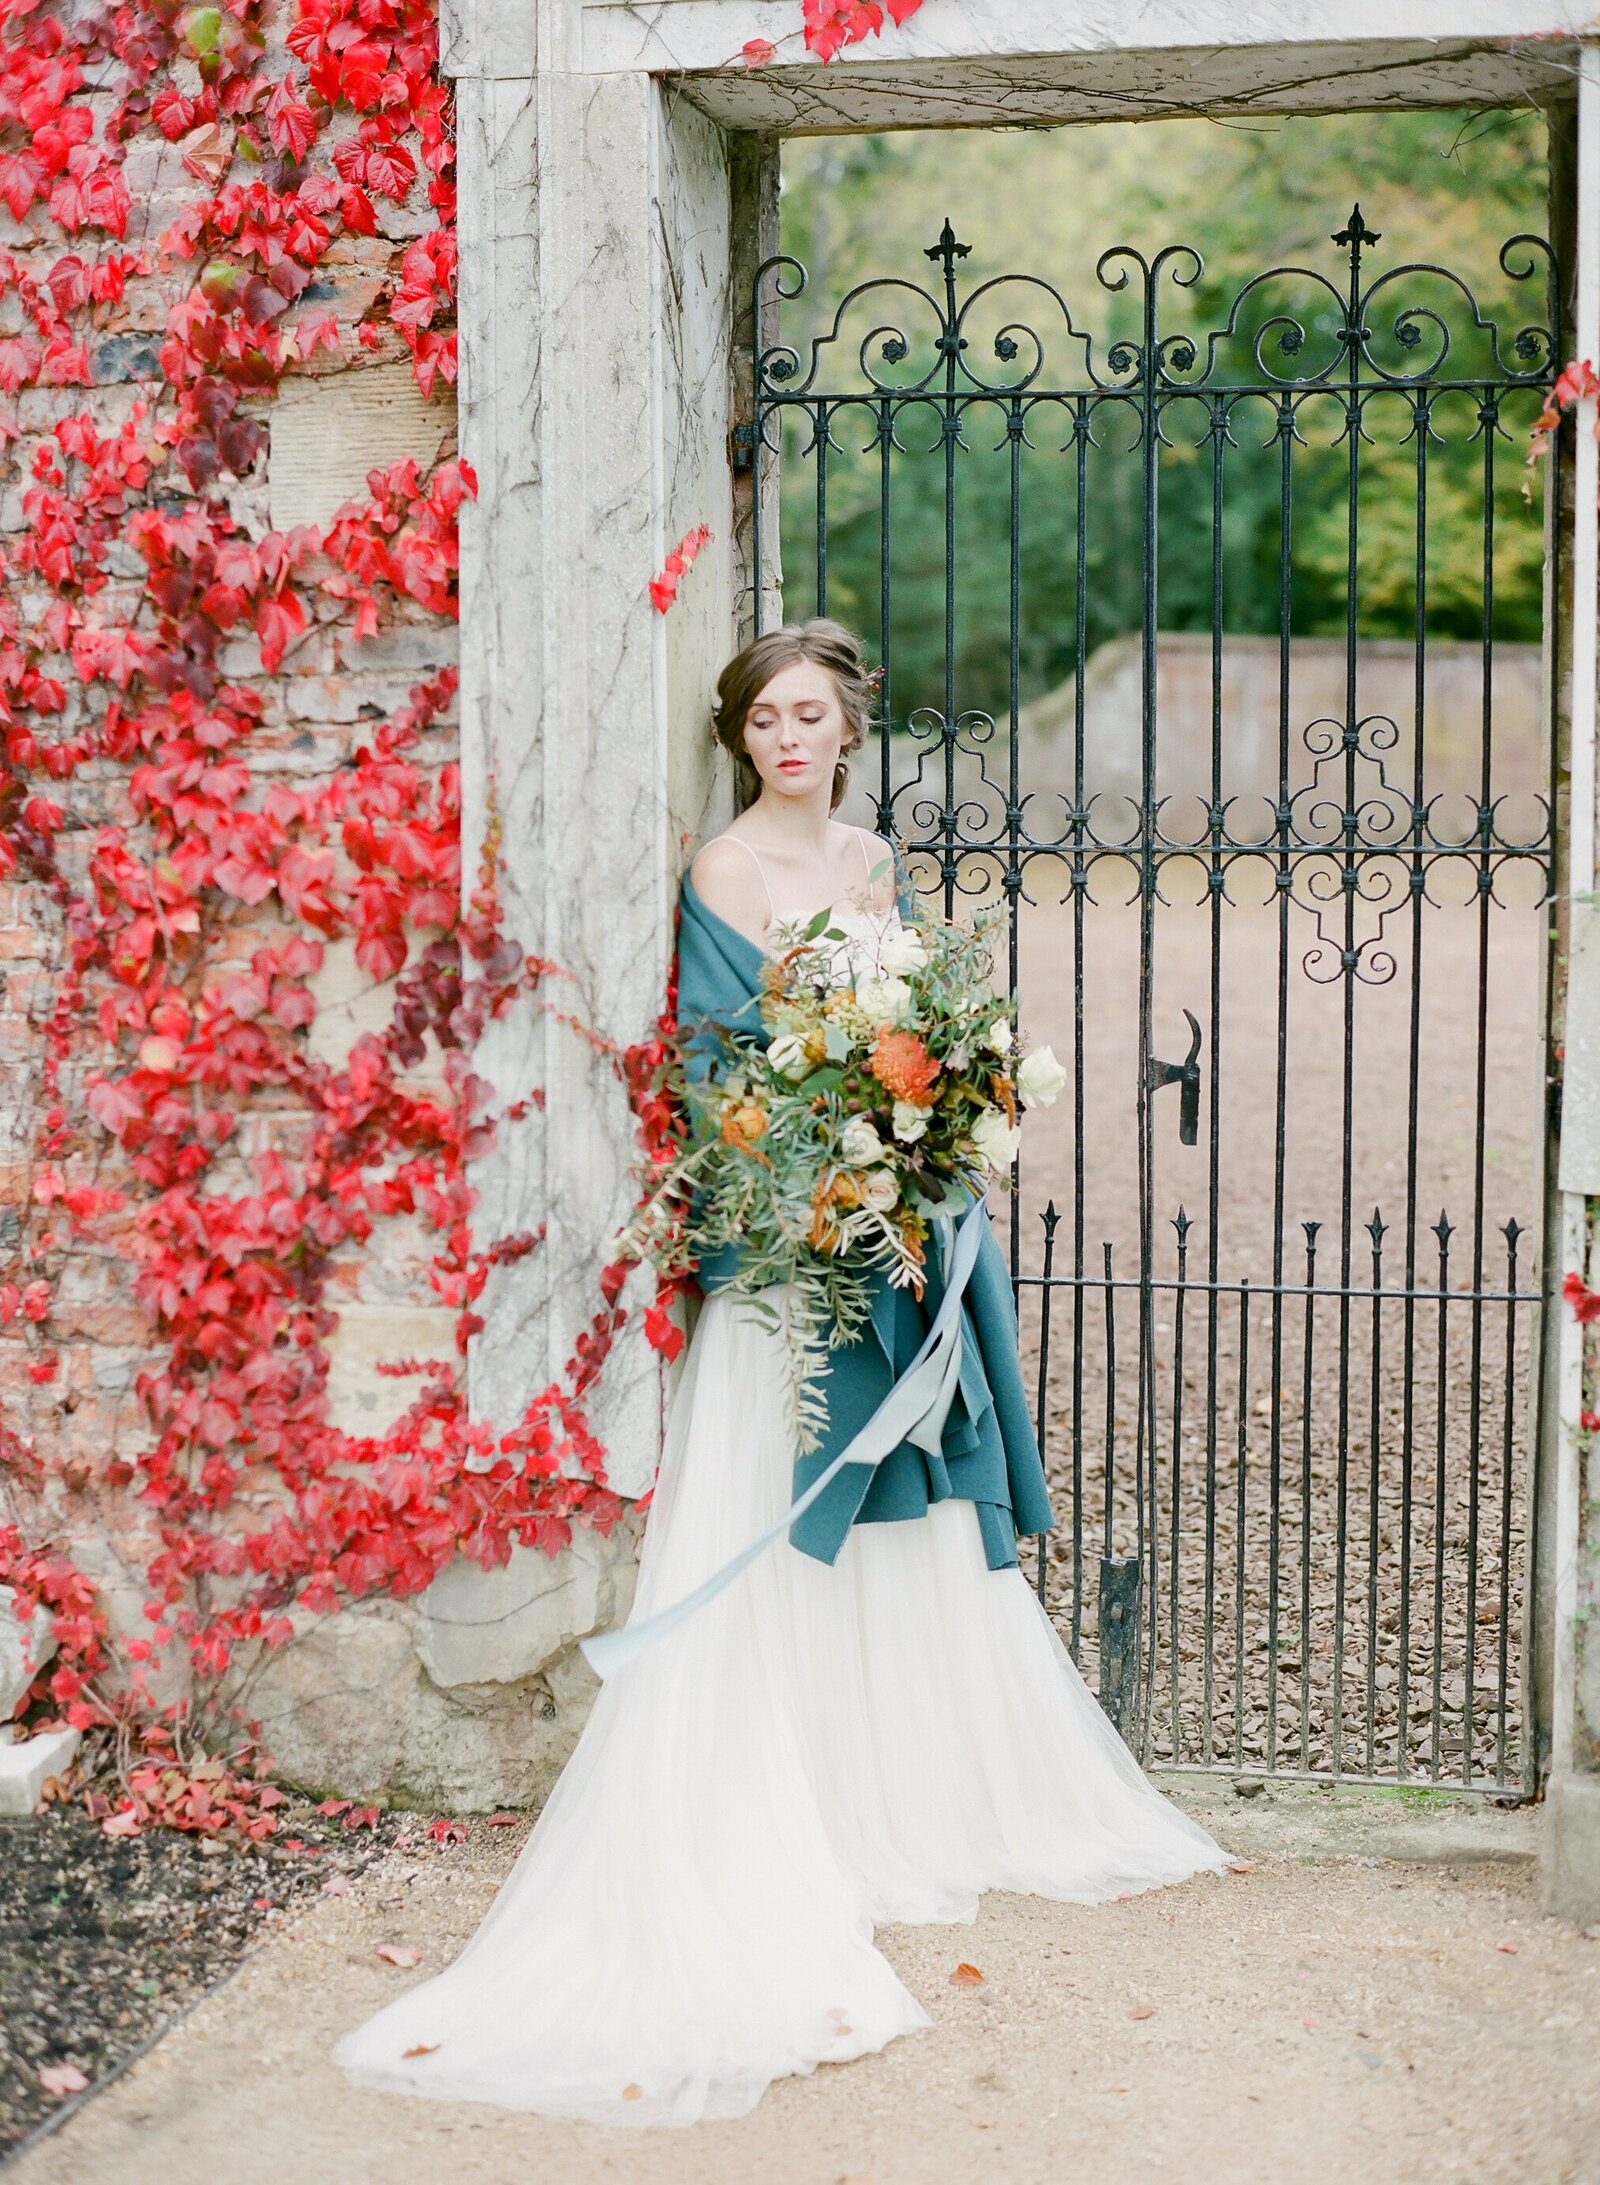 Jacqueline Anne Photography - A Scottish Autumn Editorial at Yester Estate